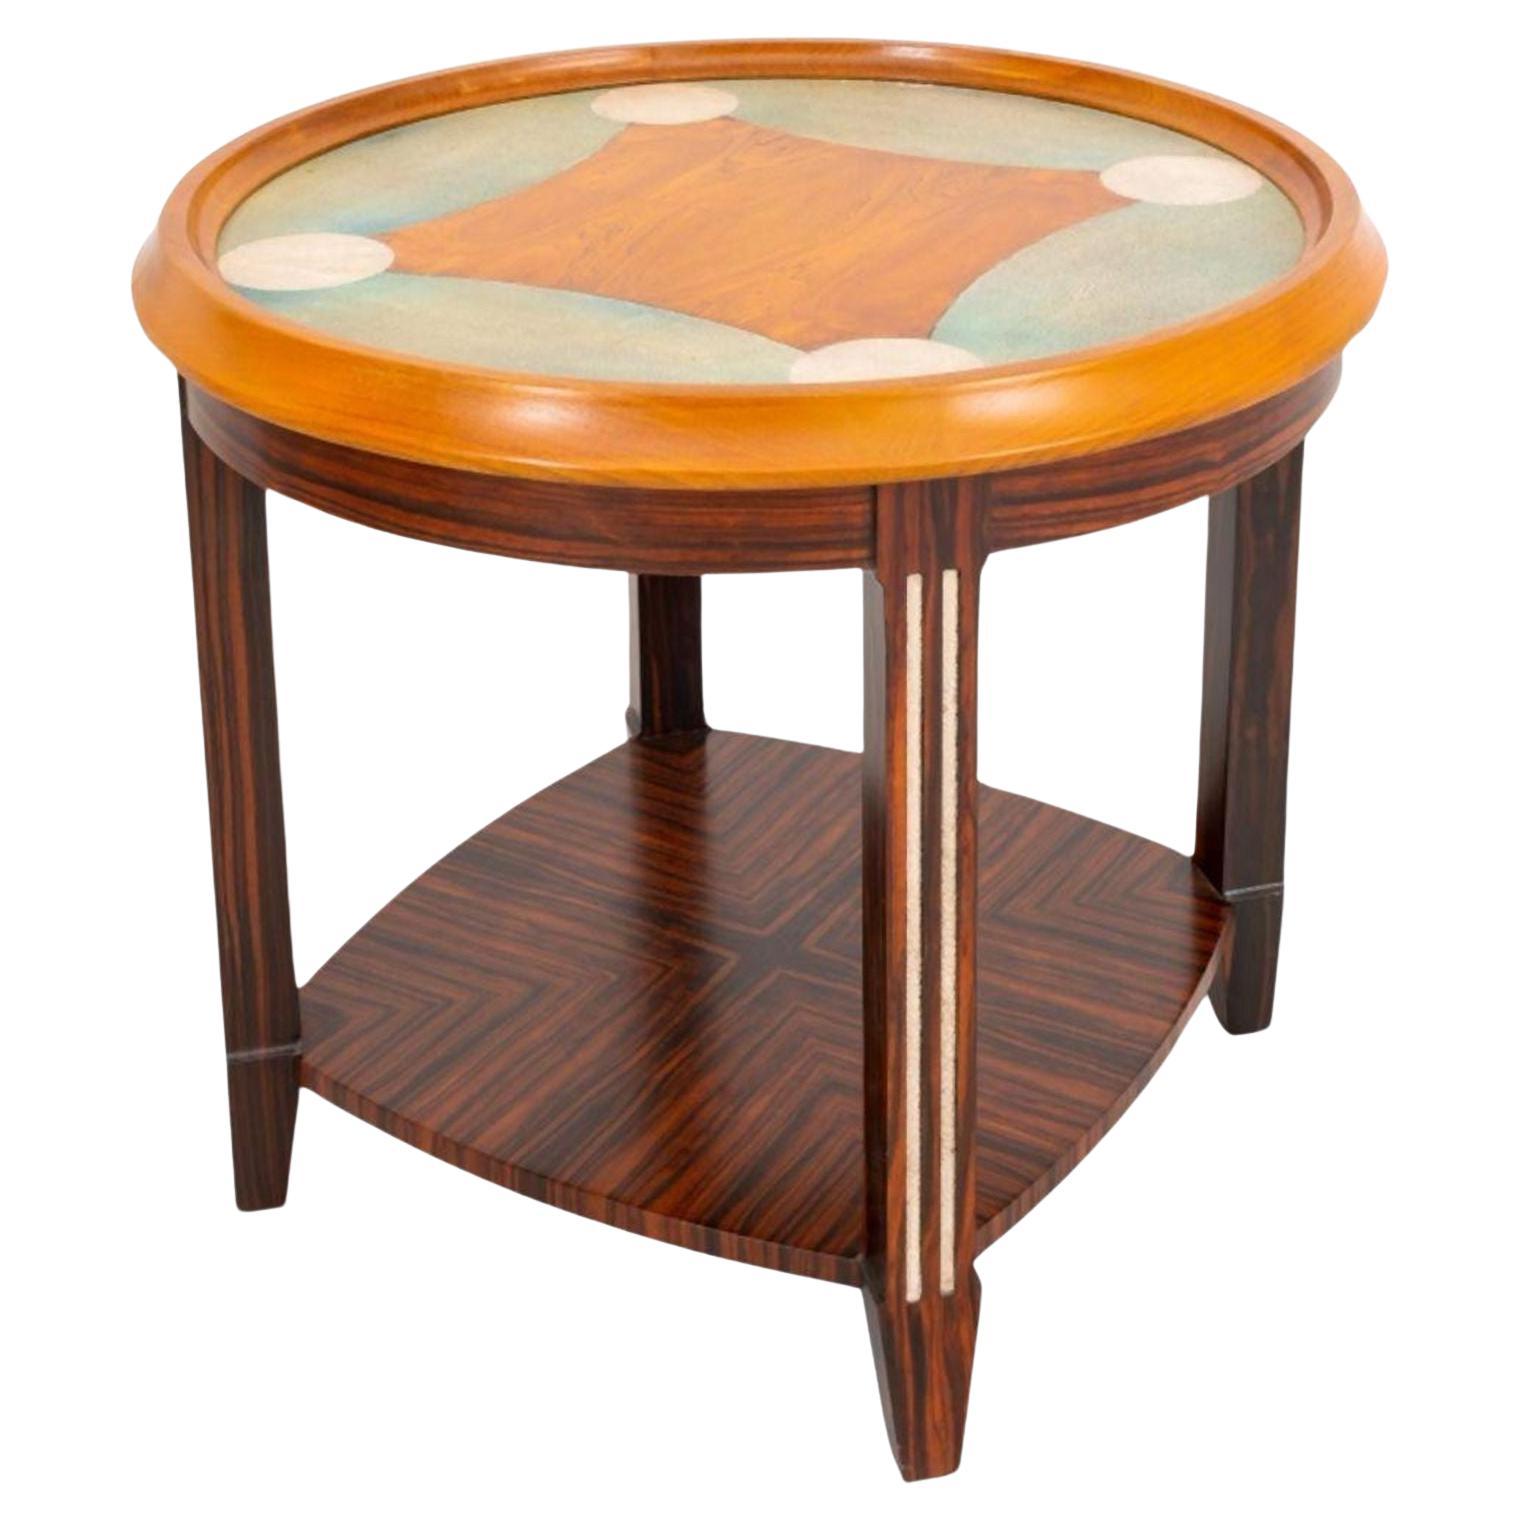 Art Deco Faux Shagreen Side Table, c. 1980's For Sale